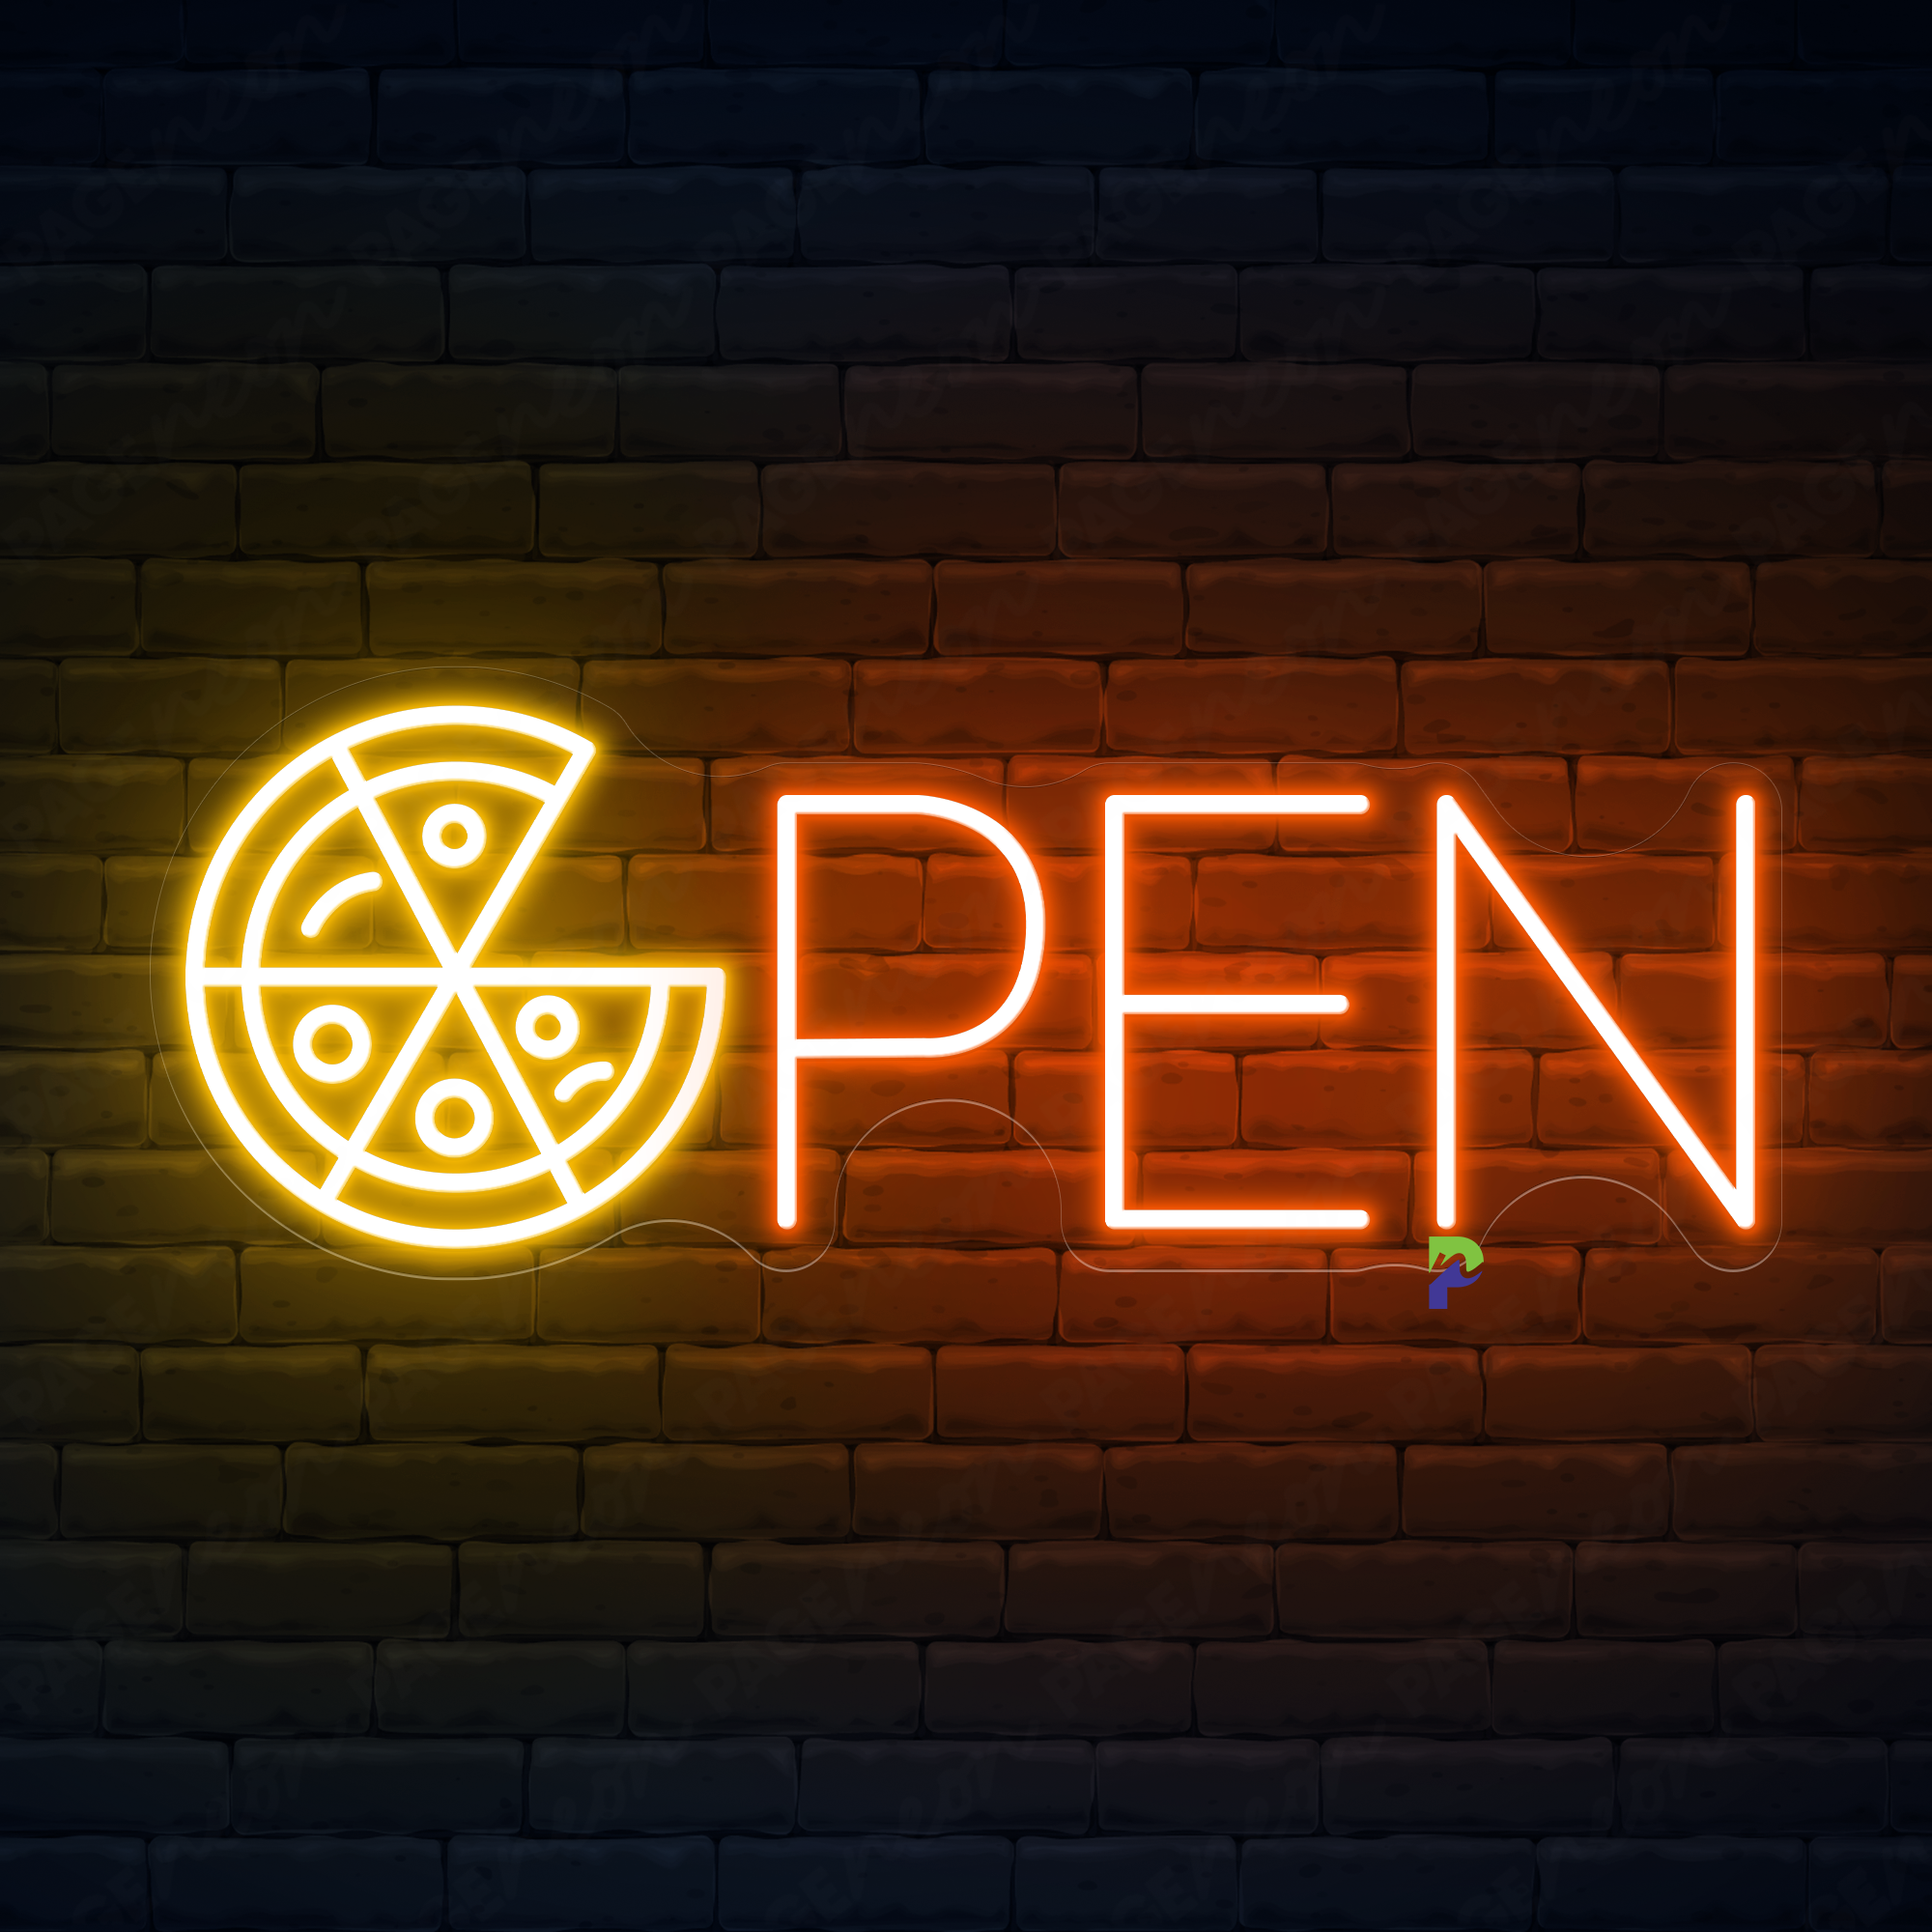 Pizza Neon Sign Business Open Led Light